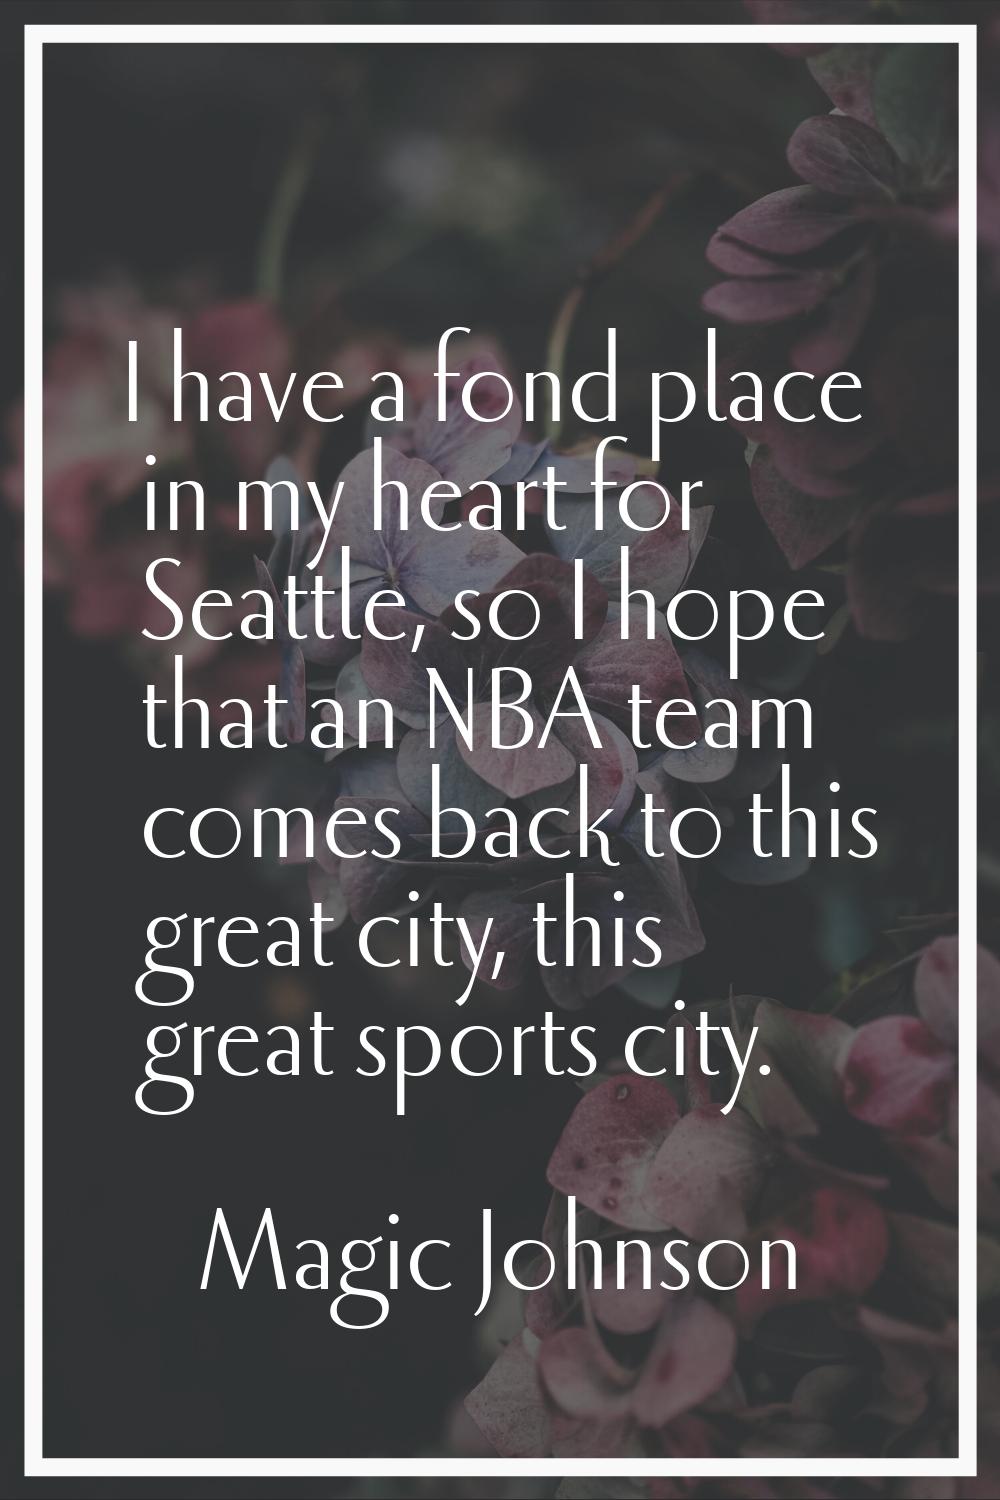 I have a fond place in my heart for Seattle, so I hope that an NBA team comes back to this great ci